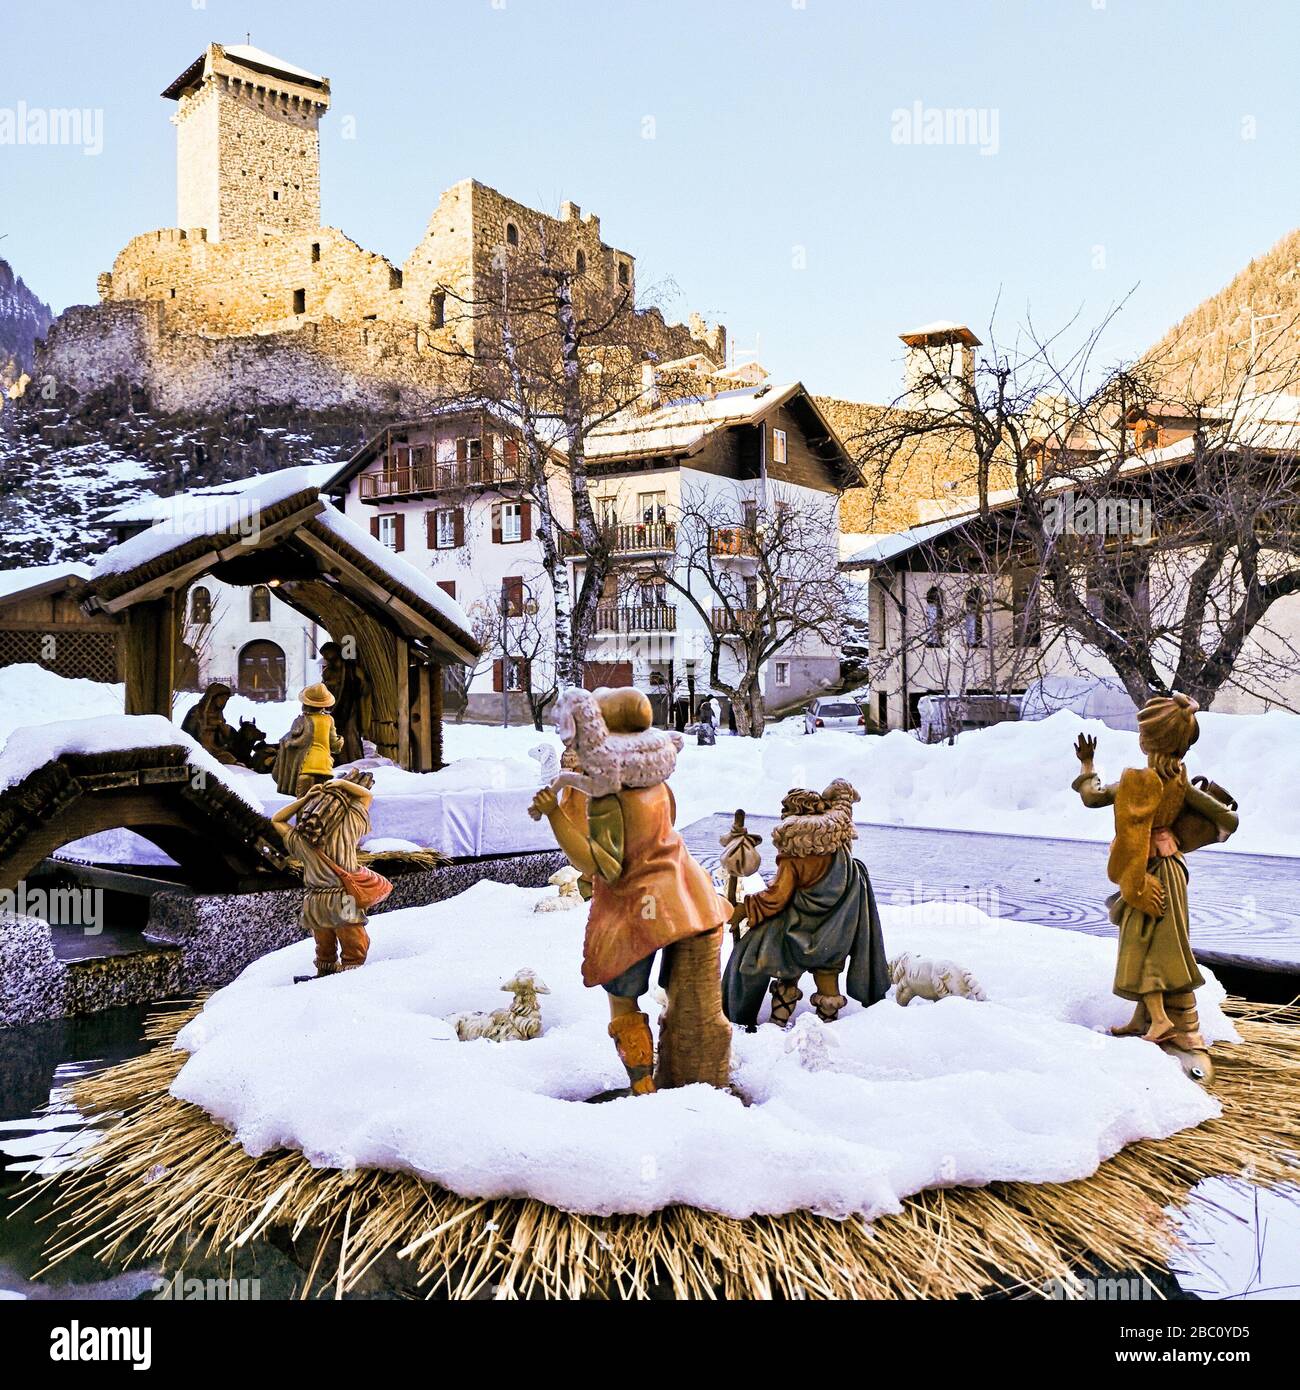 Ossana, Italy - December 26, 2019: Outdoor nativity scene covered in snow. In the background the famous castle of San Michele. Stock Photo